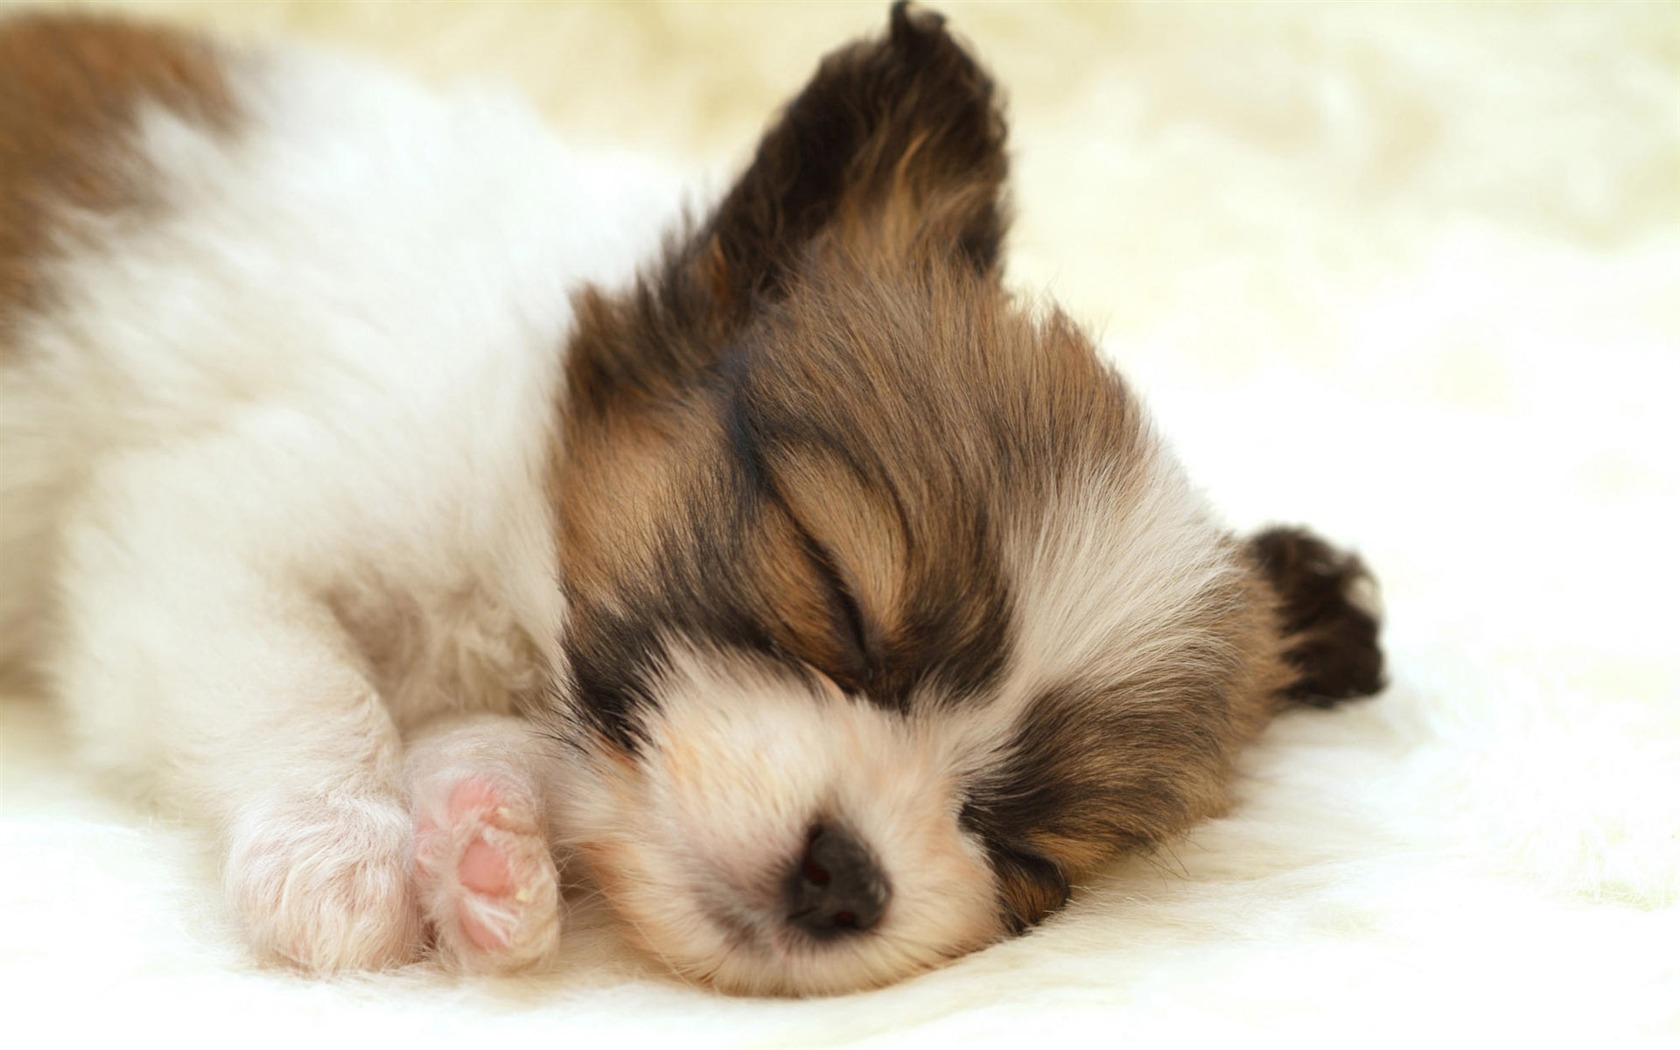 Puppy Photo HD wallpapers (10) #10 - 1680x1050